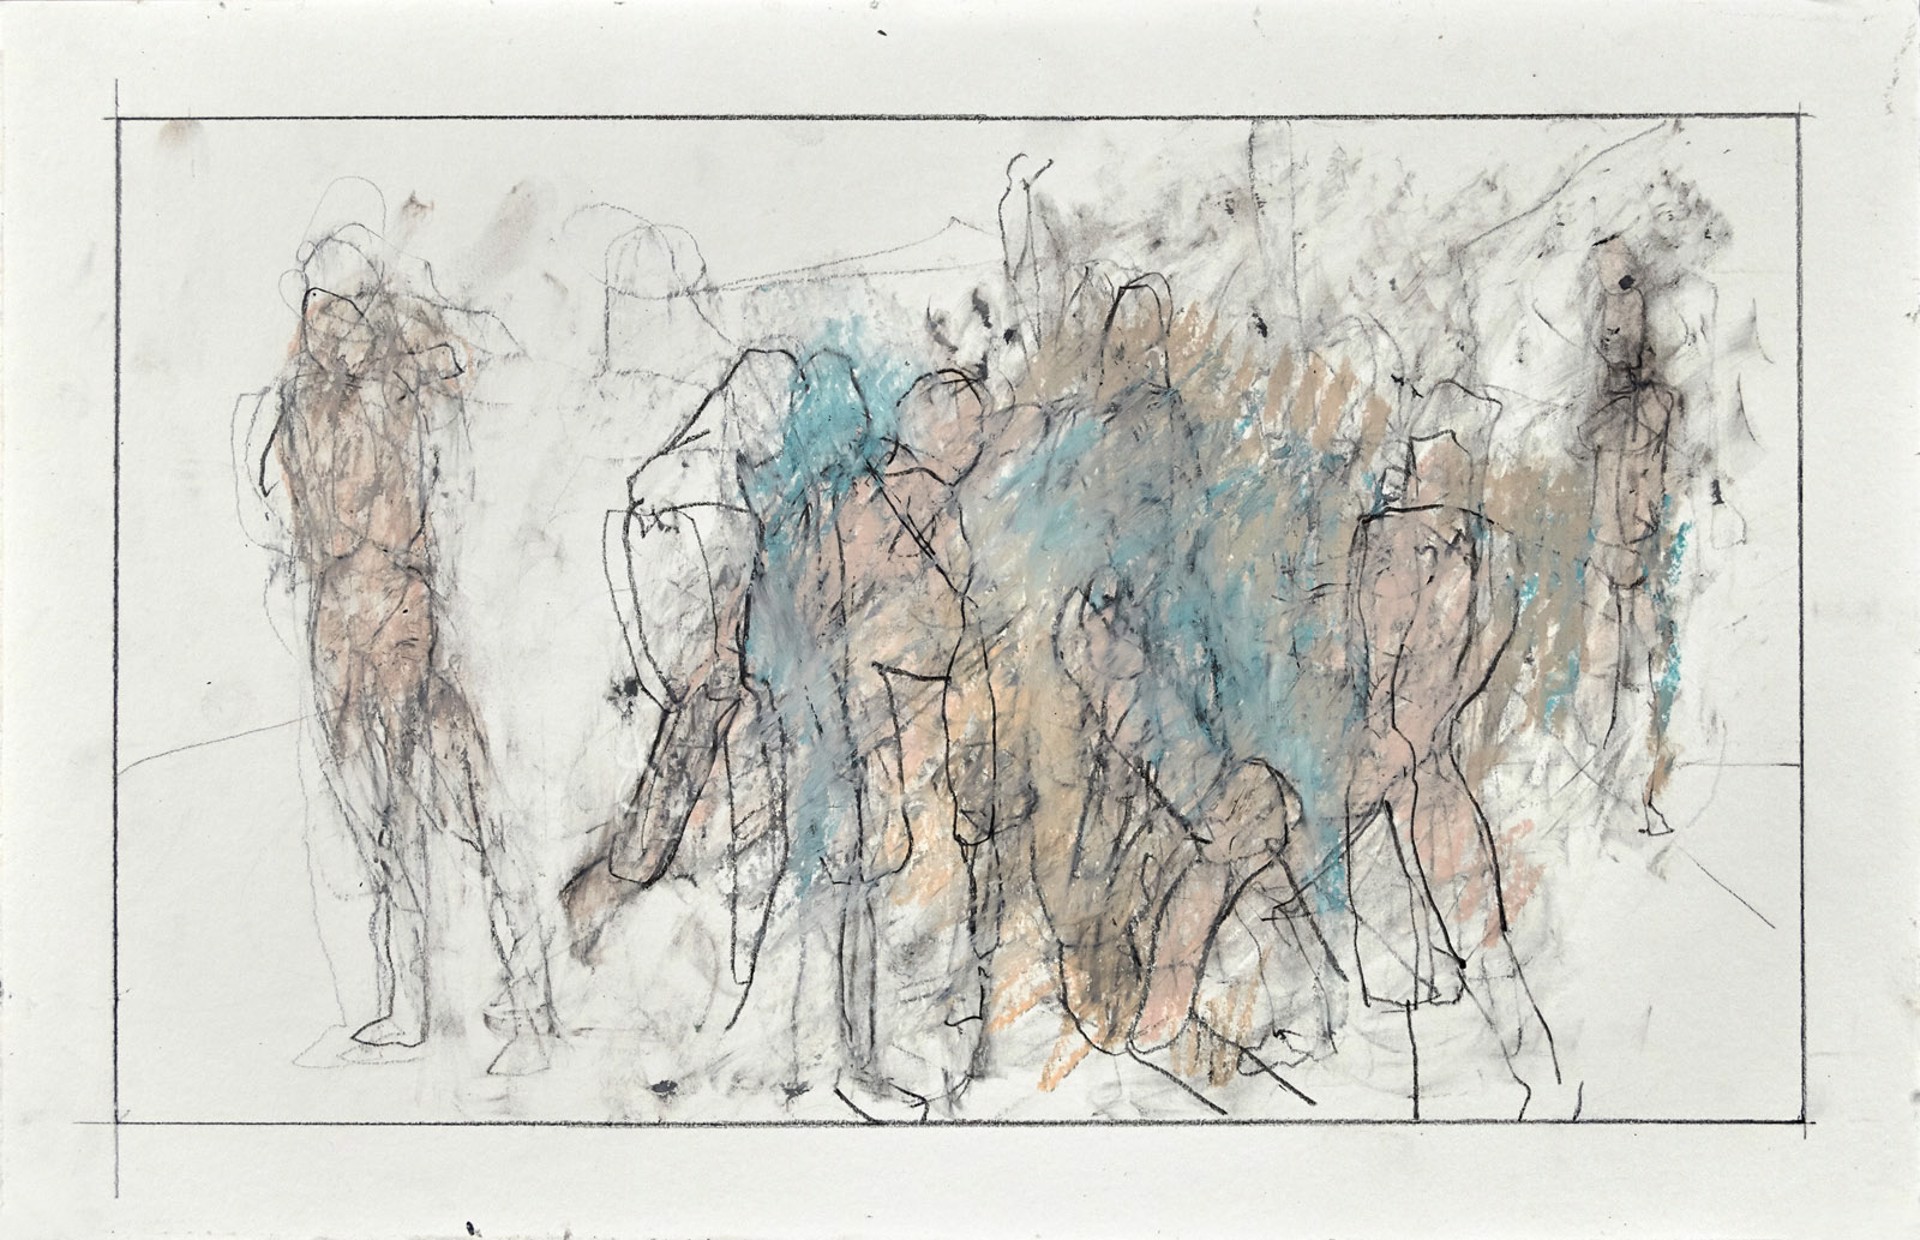 Drawings from Mt Gretna: Figure Group in Motion by Thaddeus Radell